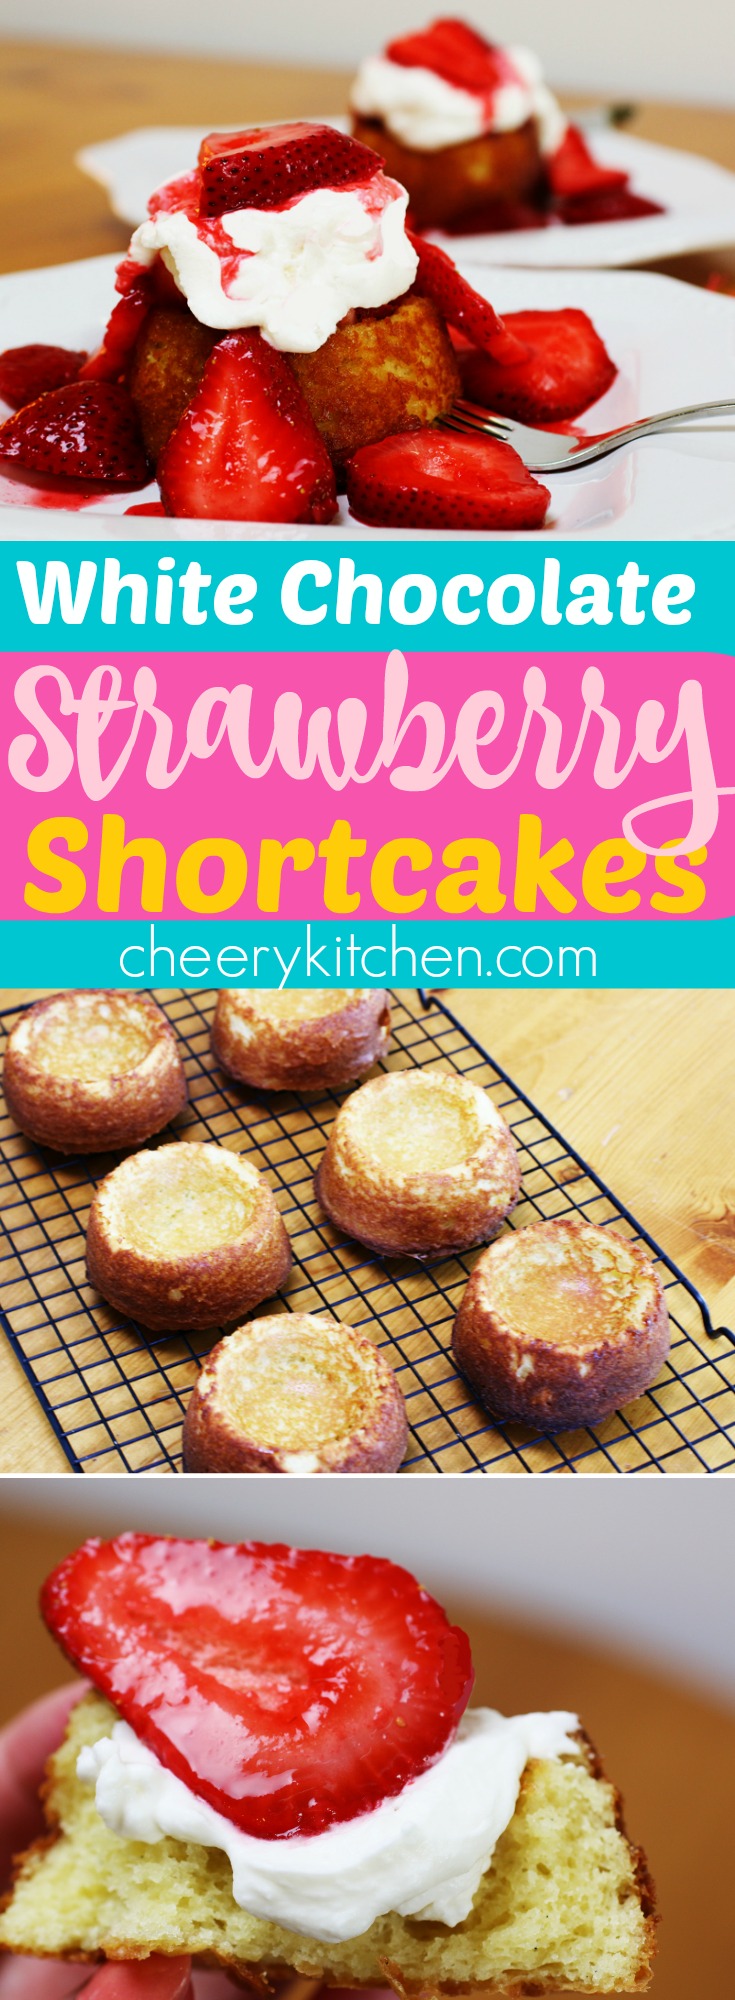 Dreaming of White Chocolate Strawberry Shortcakes, so delicious! Perfect for tea parties and dinner party finales, YUM!!!